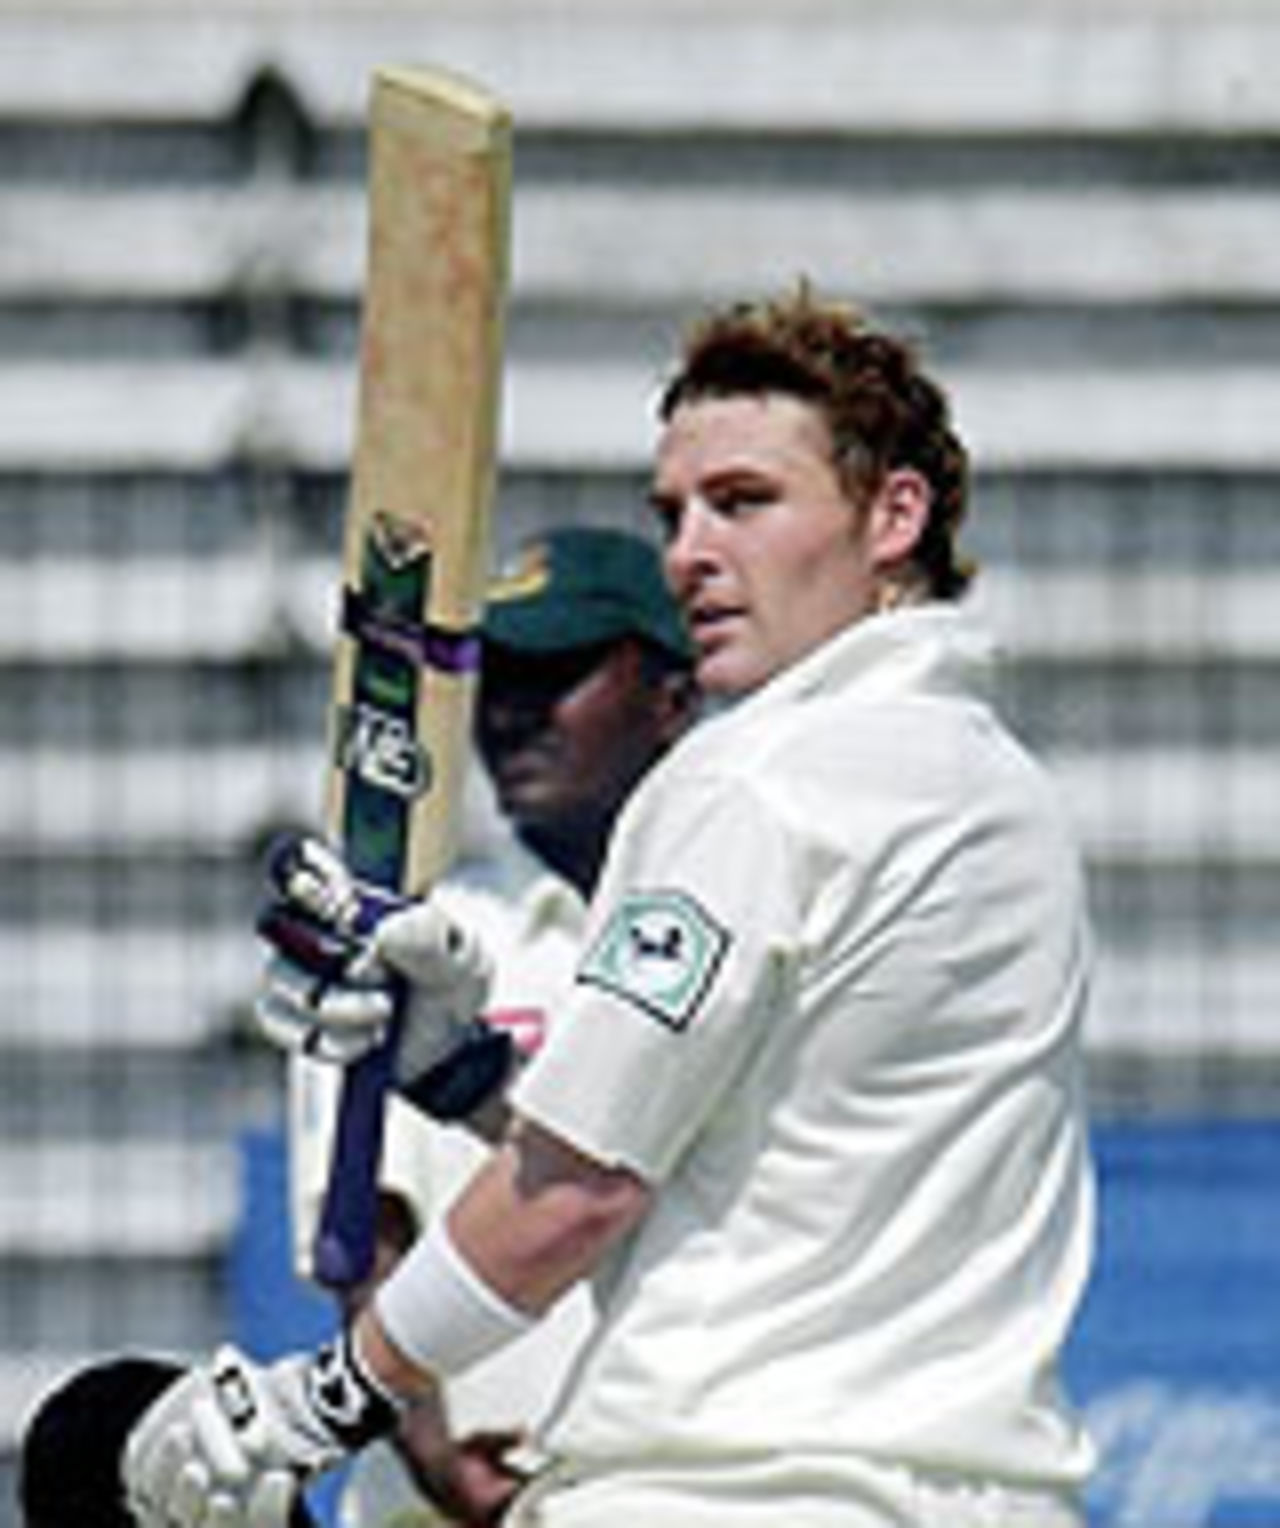 Brendon McCullum acknowledges applause for his century, Bangladesh v New Zealand, 1st Test, Dhaka, October 21, 2004